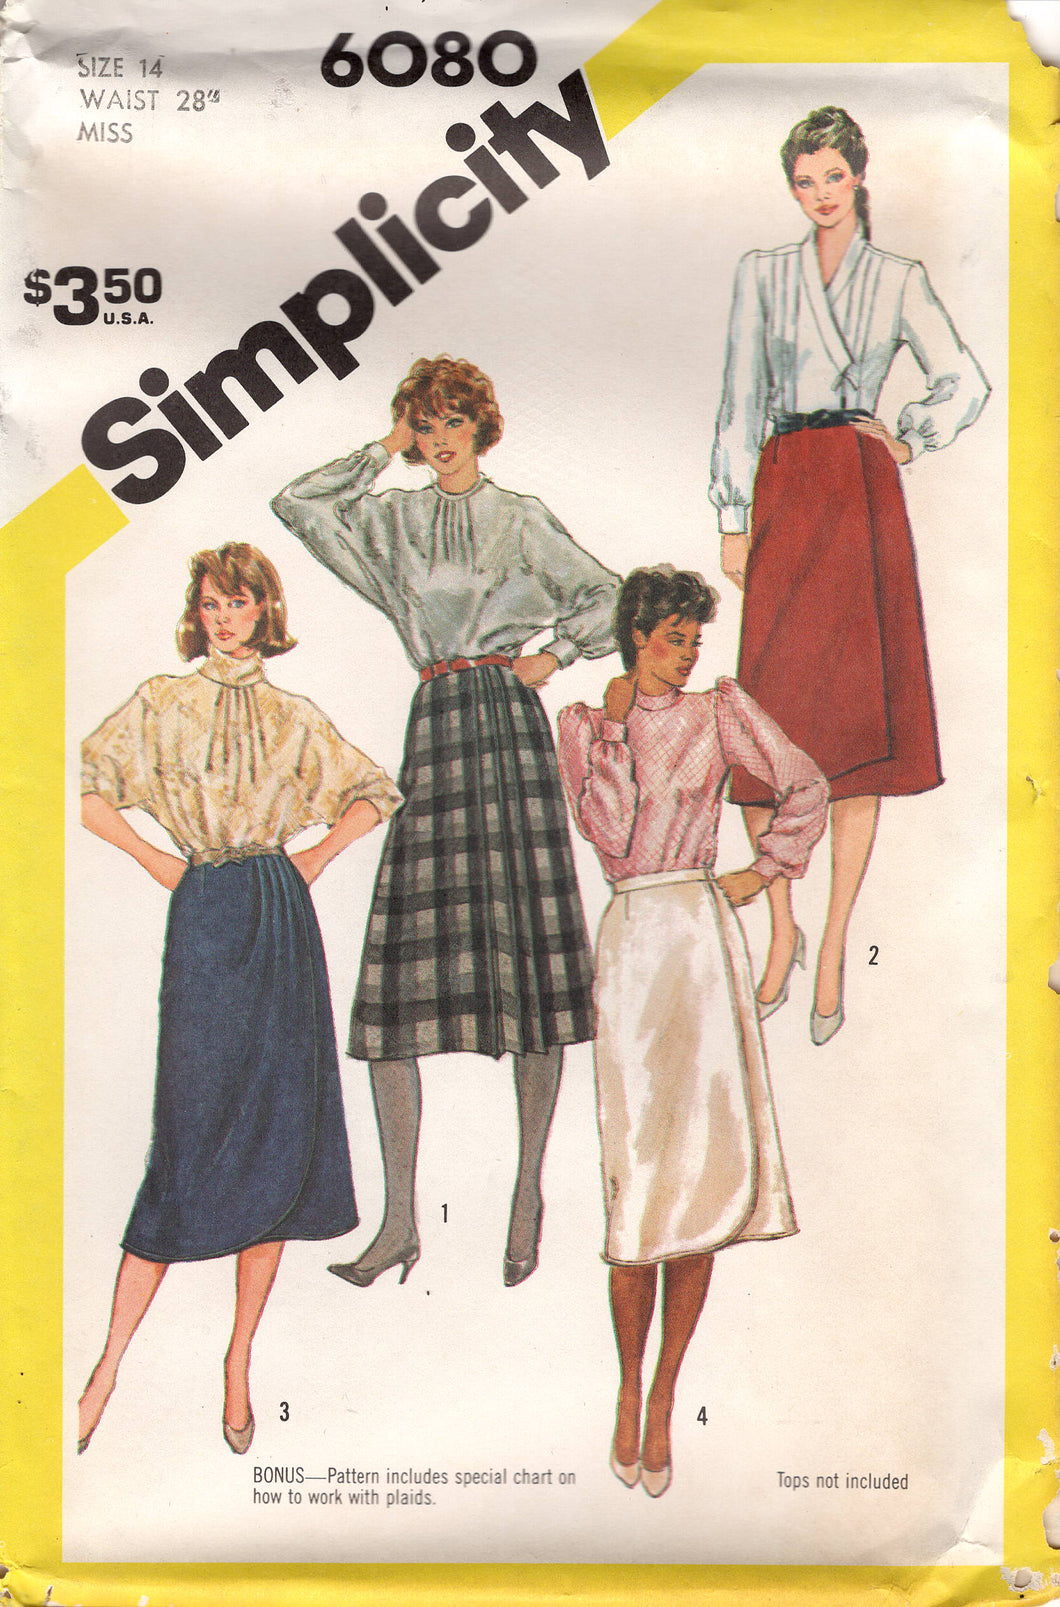 1980's Simplicity Set of Front Wrap Skirts Pattern - Waist 28